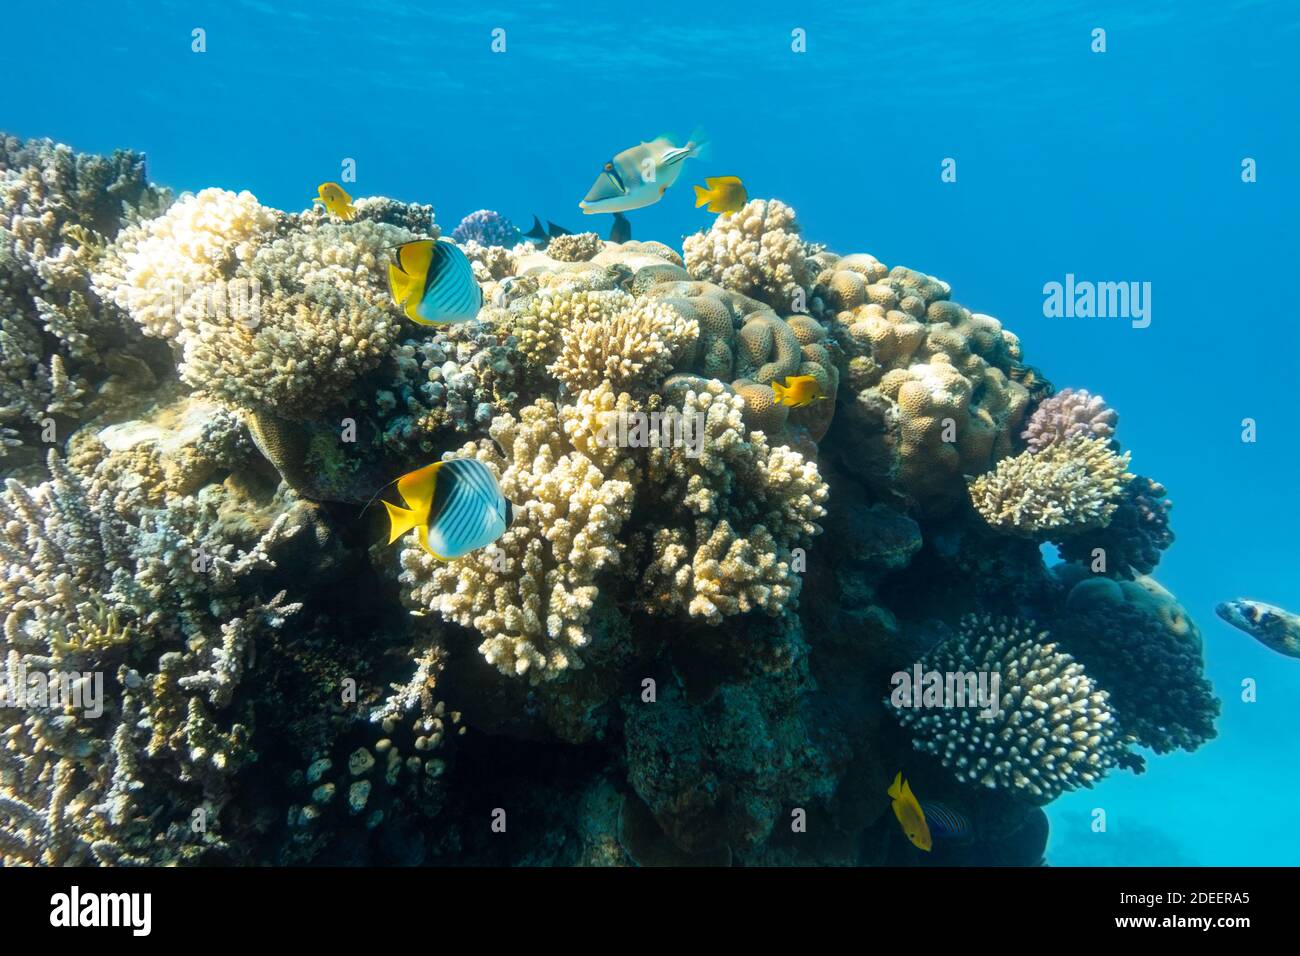 Butterflyfish (Masked, Threadfin, Chaetodon) in the coral reef, Red Sea, Egypt. Different types of bright yellow striped tropical fish in the ocean, c Stock Photo